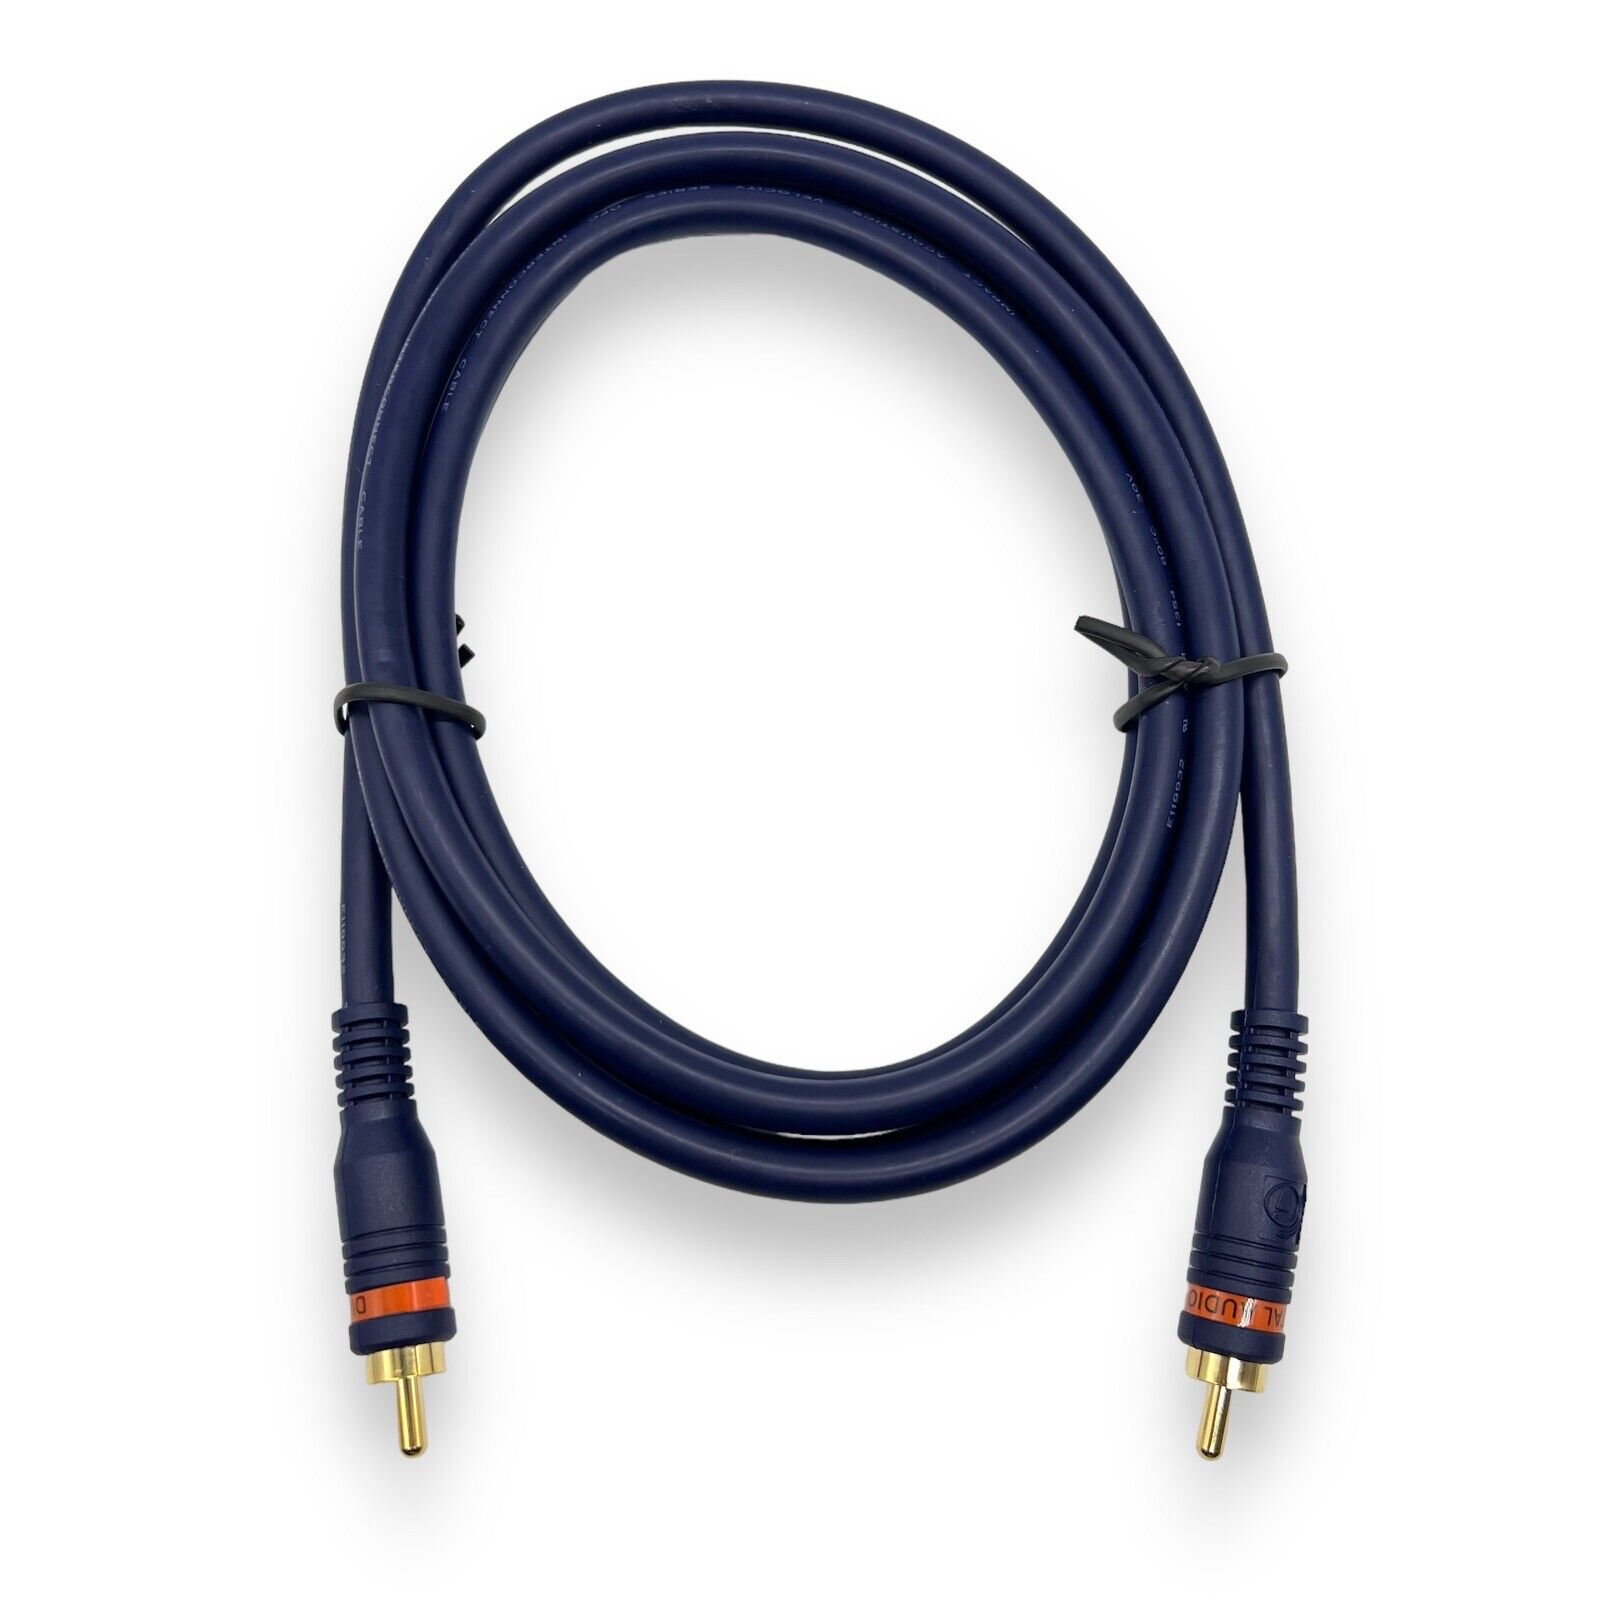 Velocity Digital Audio Coax Cable 6ft RCA Male XS/PDIF - Blue - Gold Plated NEW